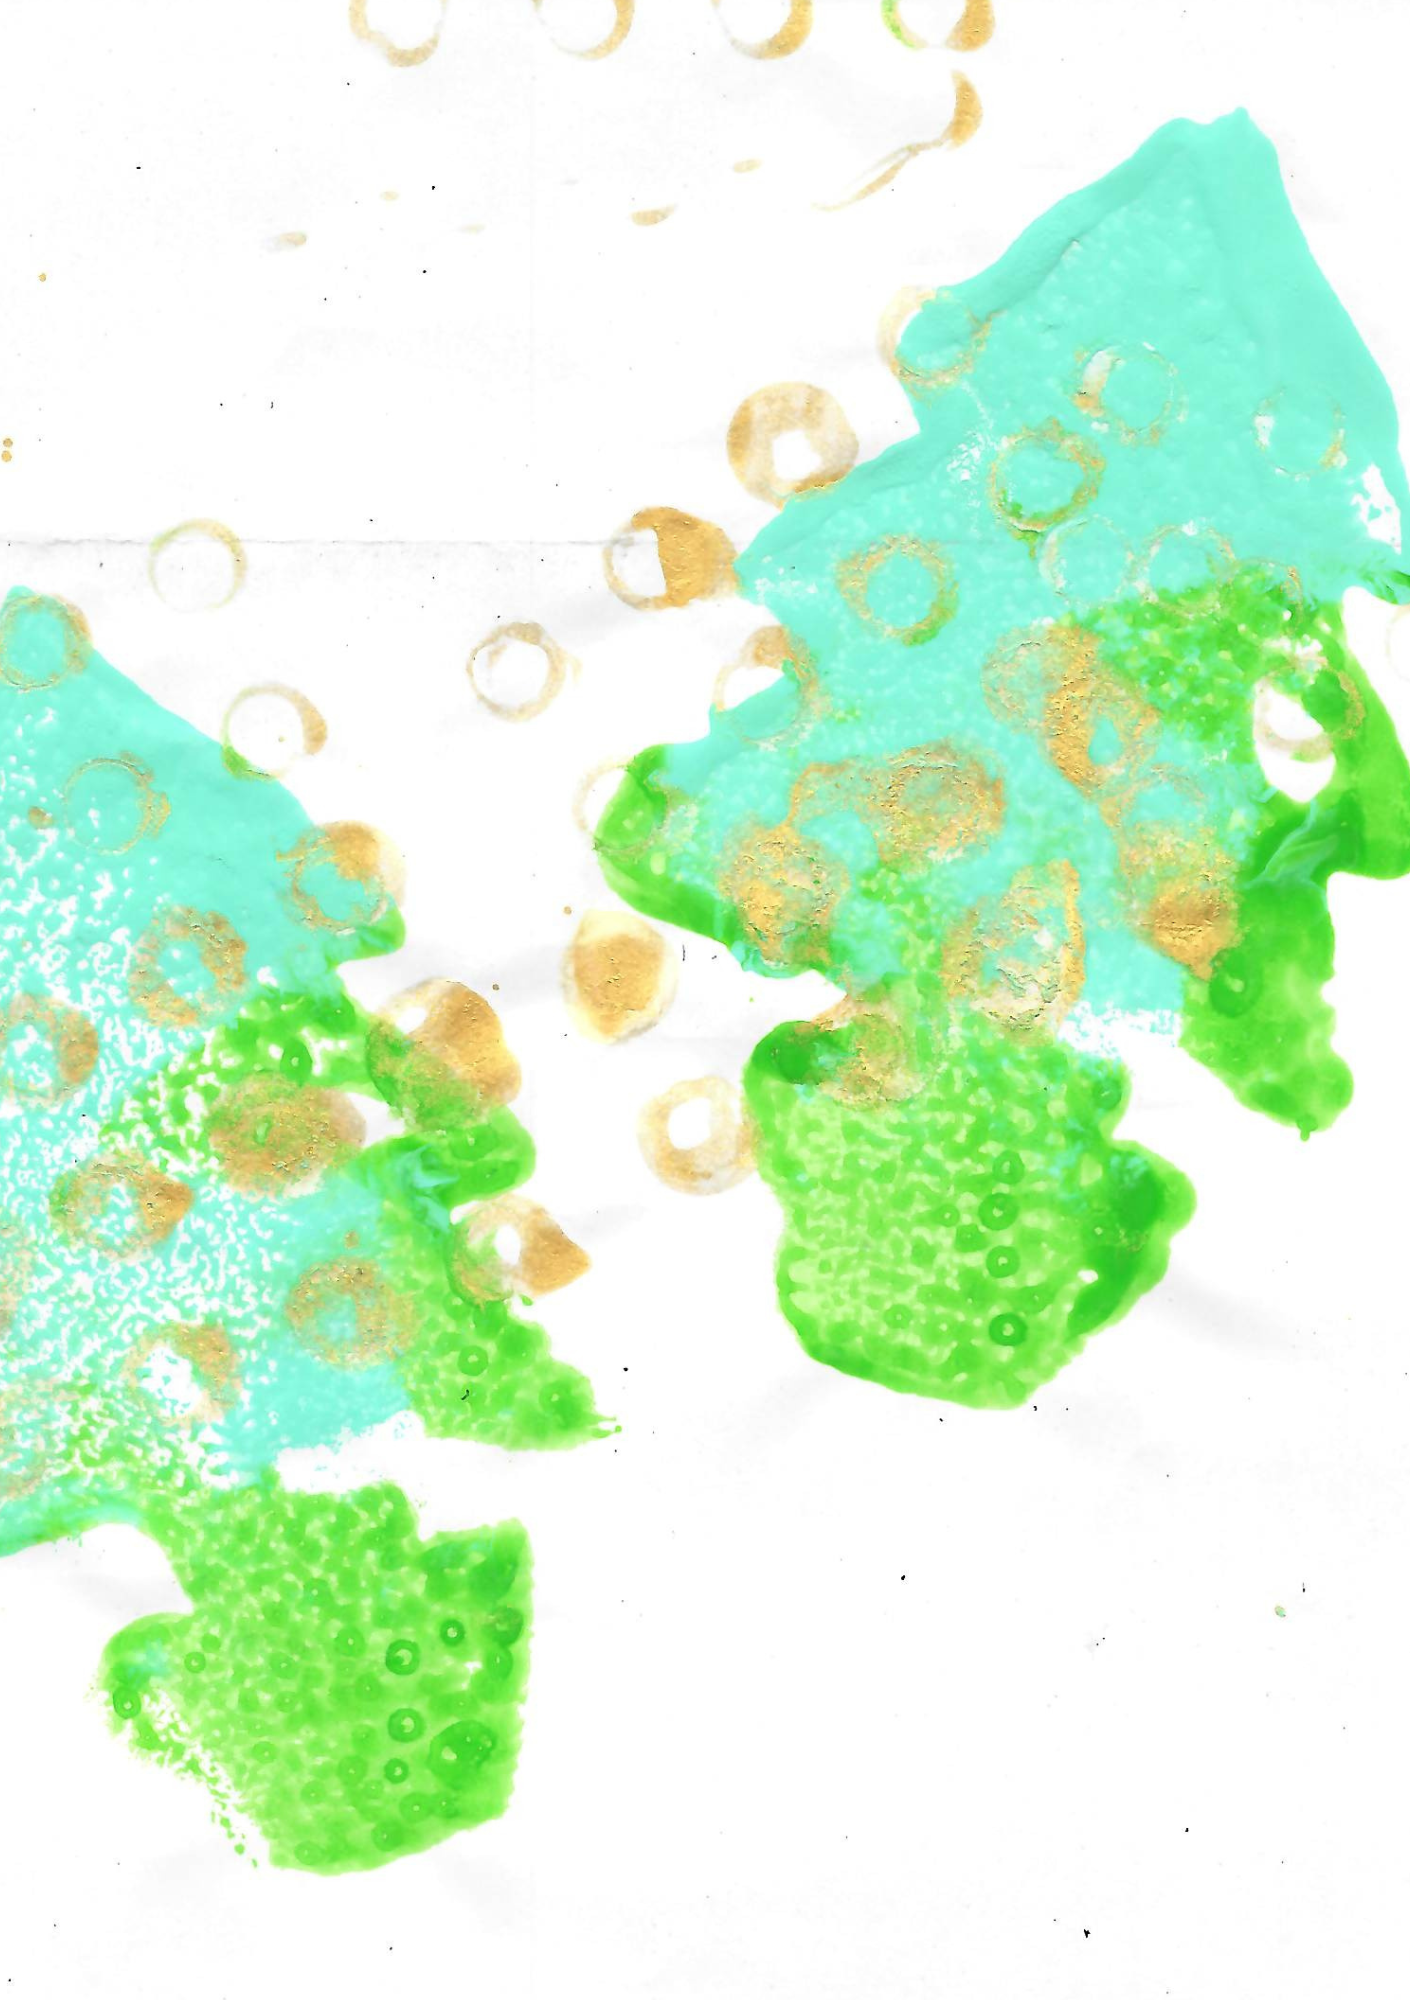  The image is an endearing and creative artwork by a two-year-old, representing Christmas trees. The trees are abstractly portrayed with bright green paint, their outlines suggesting the triangular shape of traditional Christmas trees, possibly created with stamping techniques. Within the green areas, there are textured patterns that add a tactile dimension to the trees. Gold paint is used to stamp circular shapes amidst the green, reminiscent of festive baubles decorating the trees. The artwork, with its free-form approach and lively use of color, captures the essence of a child's perspective on the classic holiday symbol, conveying both innocence and festivity.